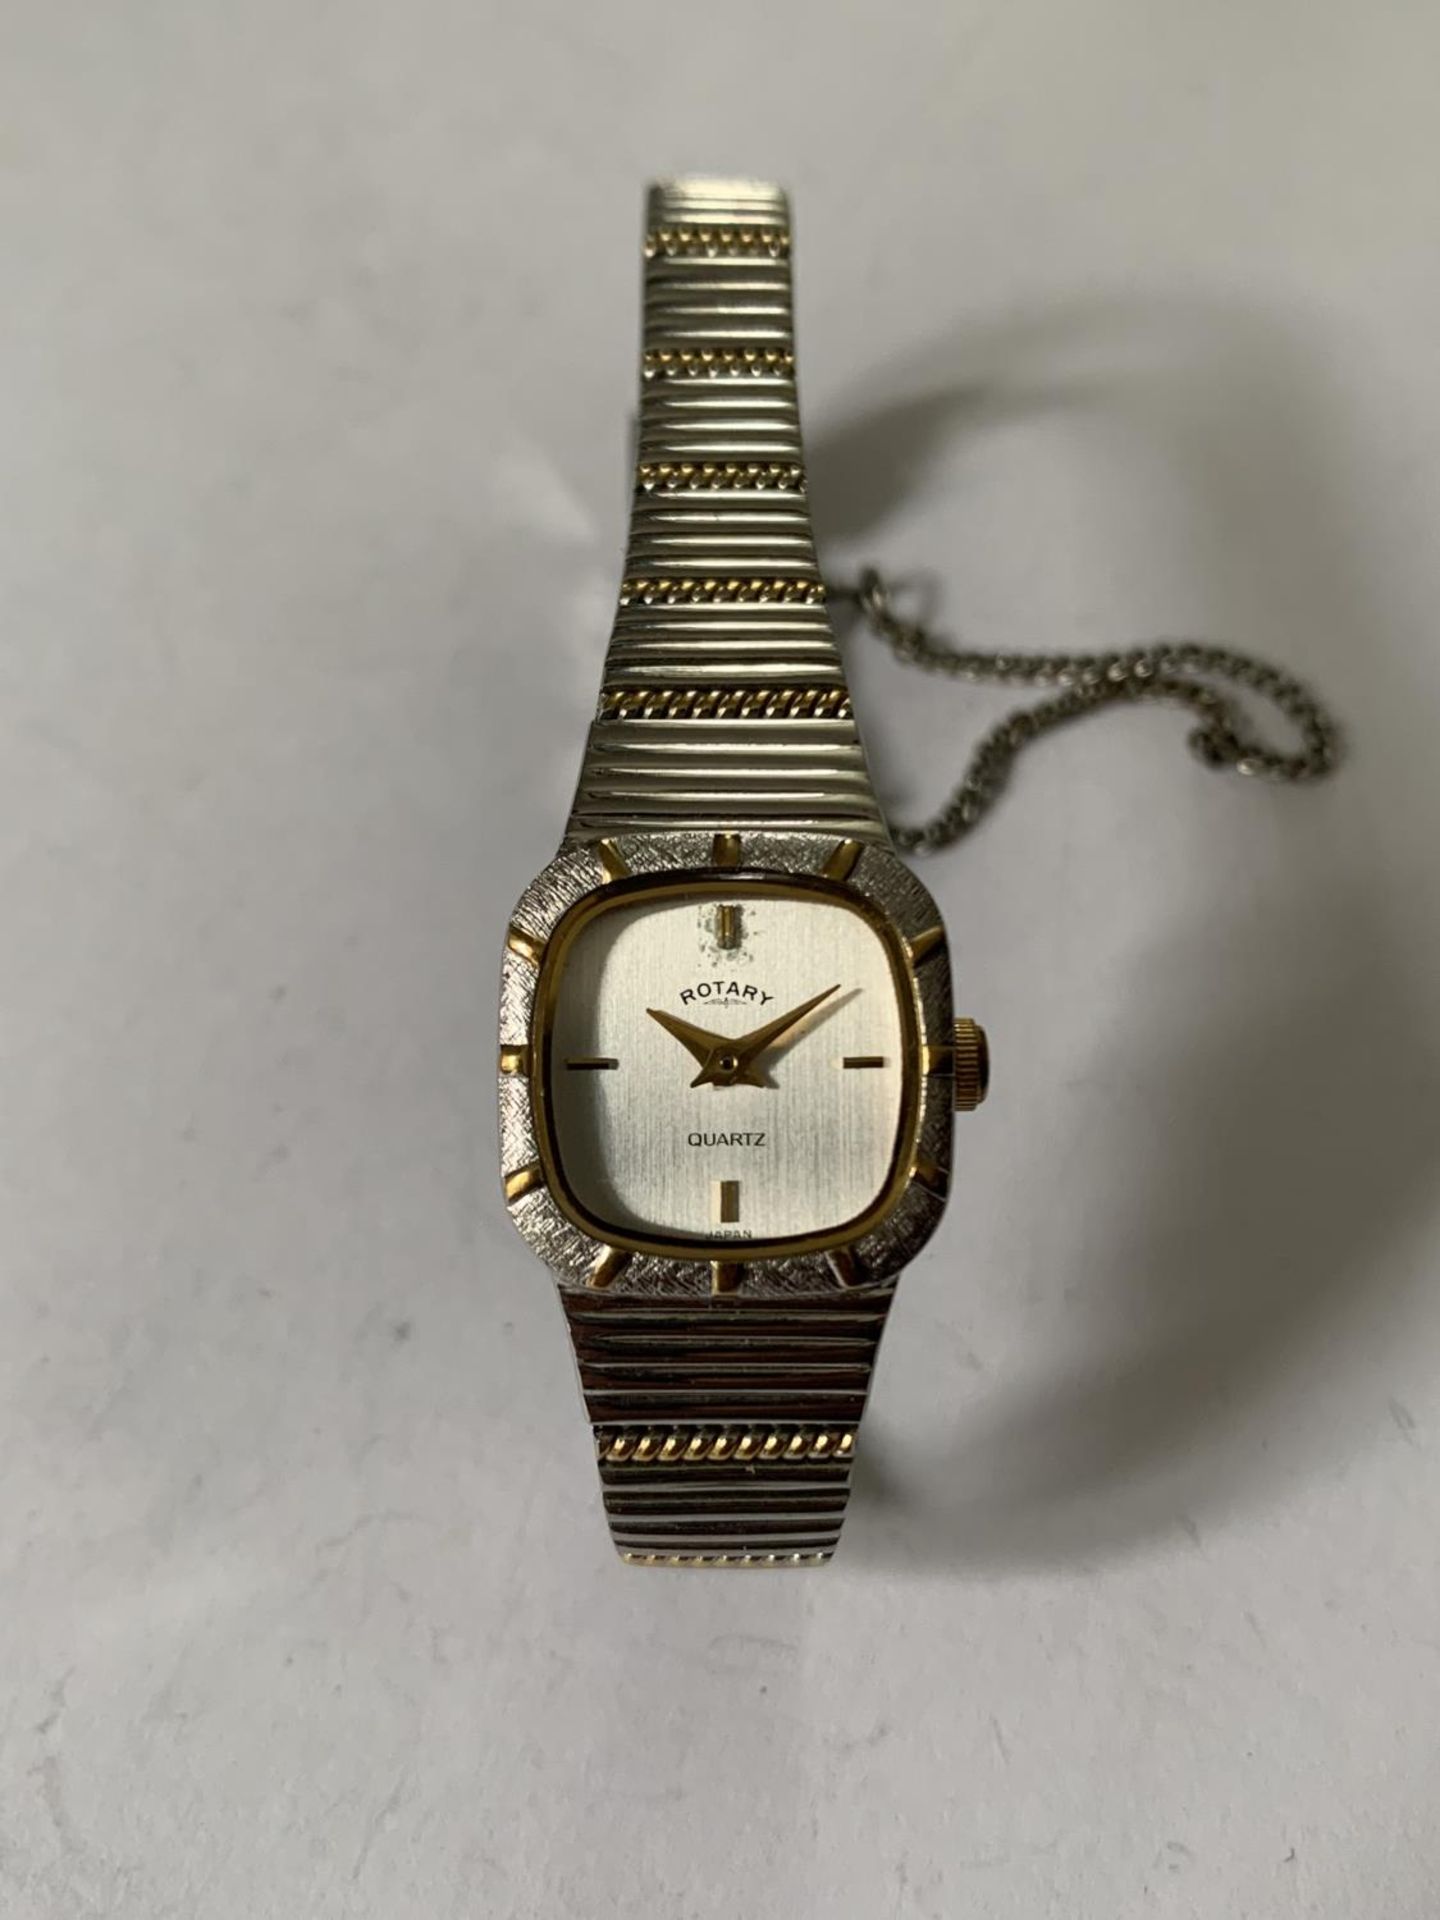 A ROTARY WHITE AND YELLOW METAL STRAP WRIST WATCH IN NEED OF BATTERY